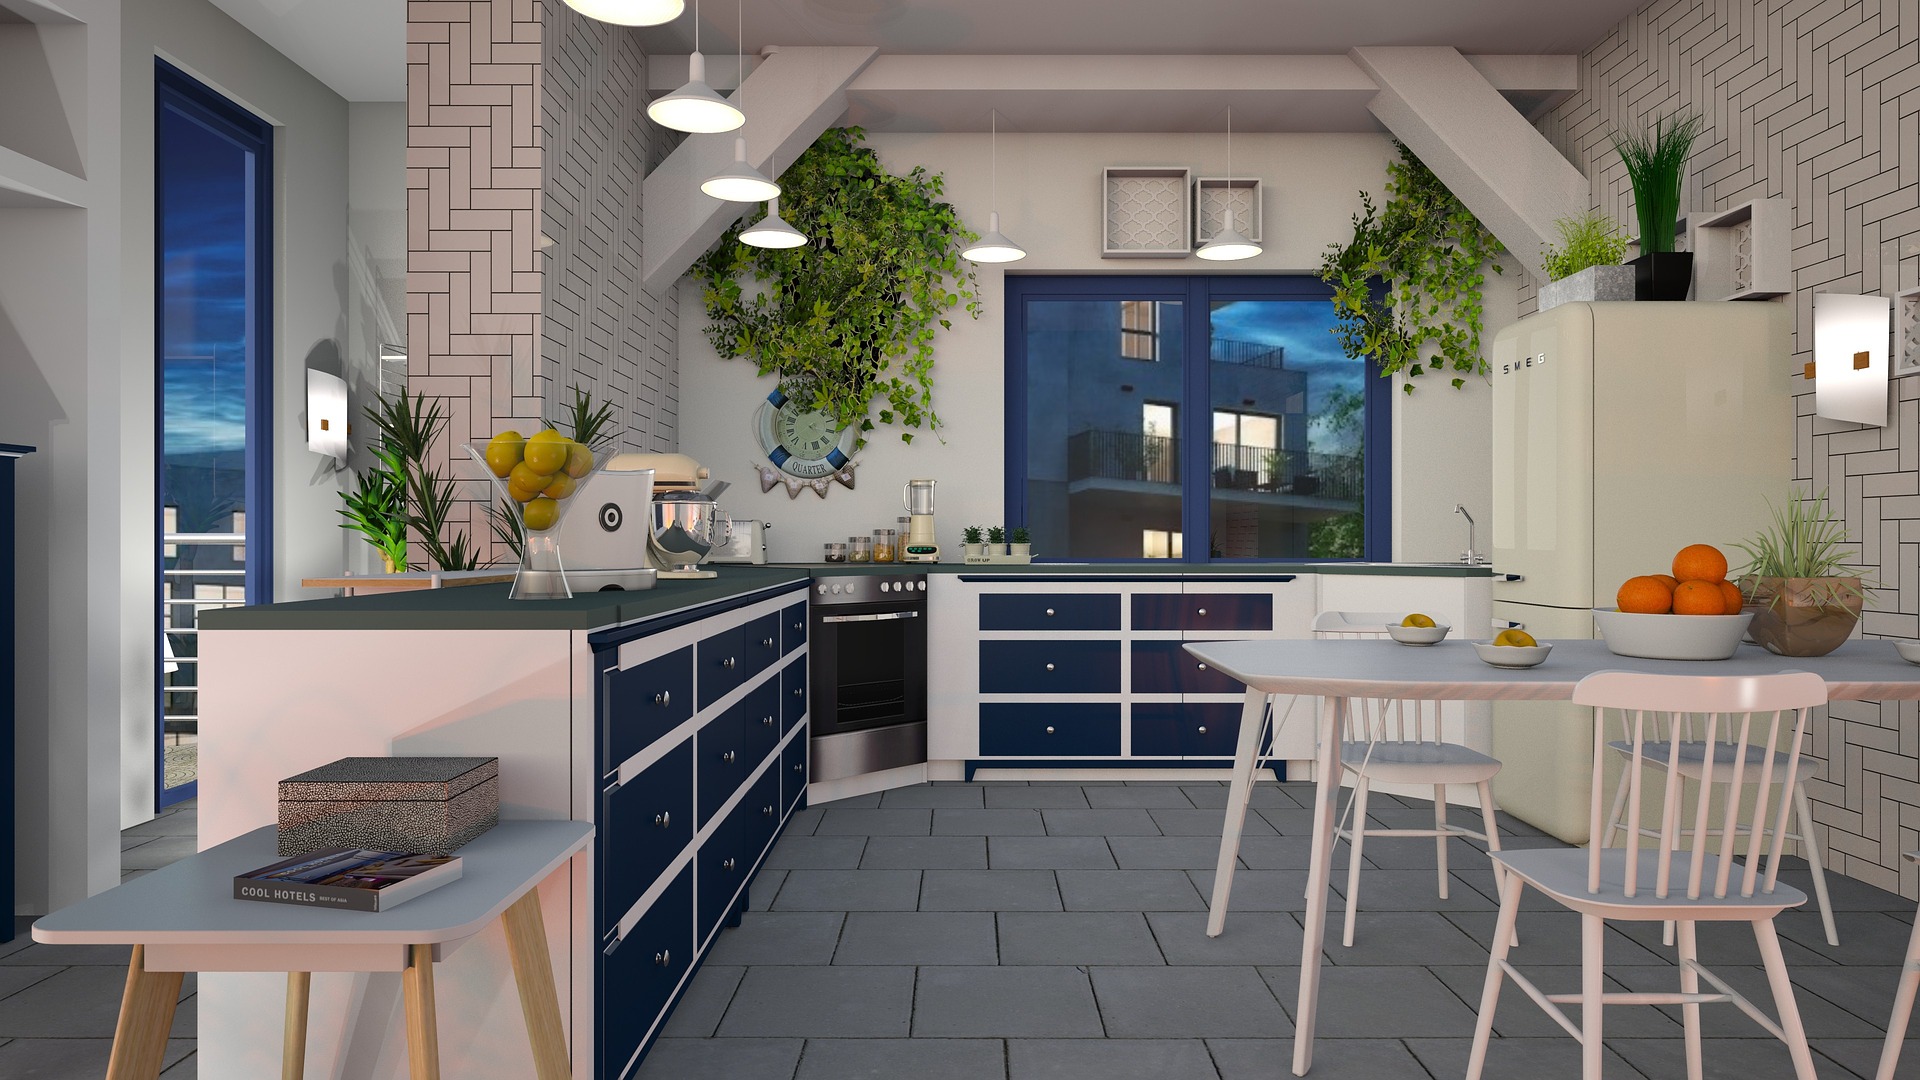 A kitchen featuring high-contrast deep blue with white Carrara marble